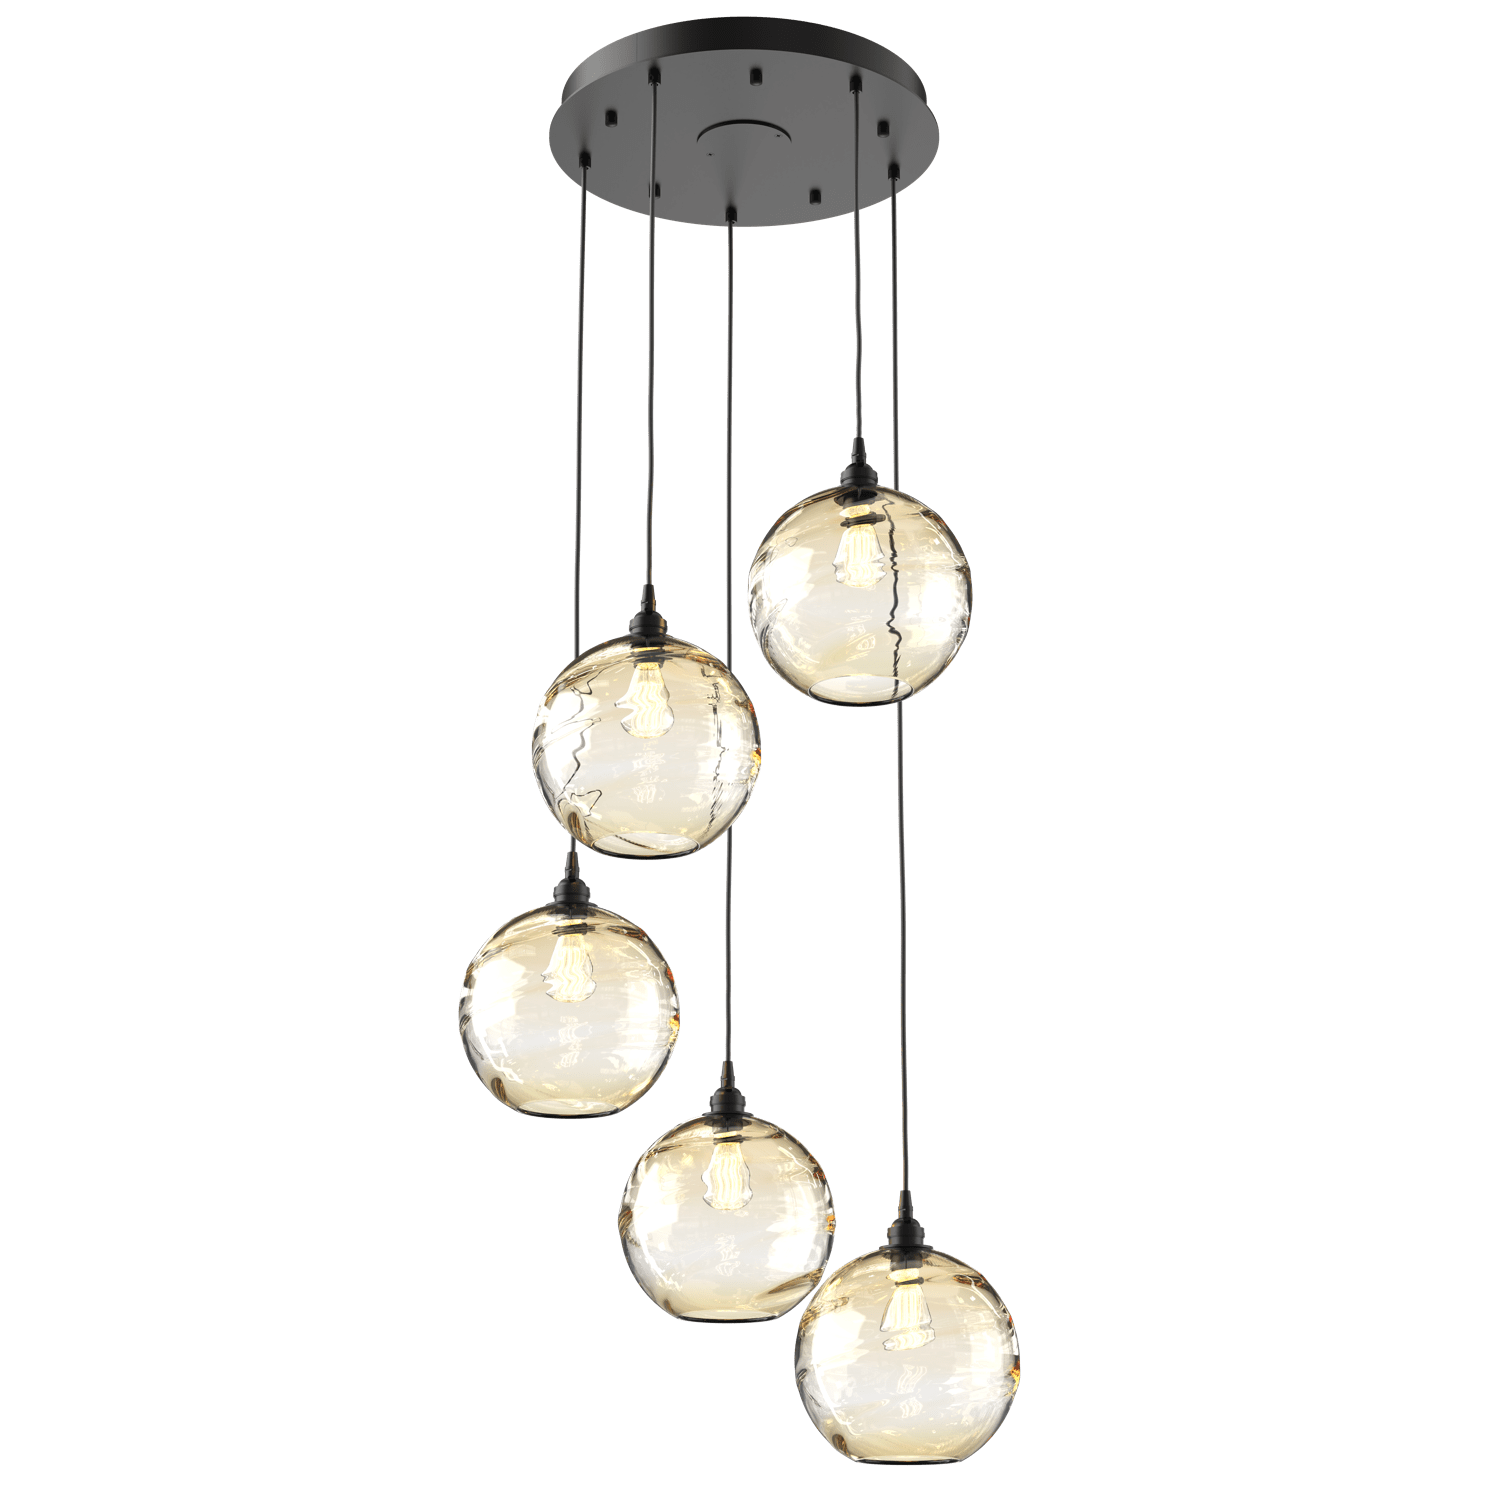 CHB0047-05-MB-OA-Hammerton-Studio-Optic-Blown-Glass-Terra-5-light-round-pendant-chandelier-with-matte-black-finish-and-optic-amber-blown-glass-shades-and-incandescent-lamping